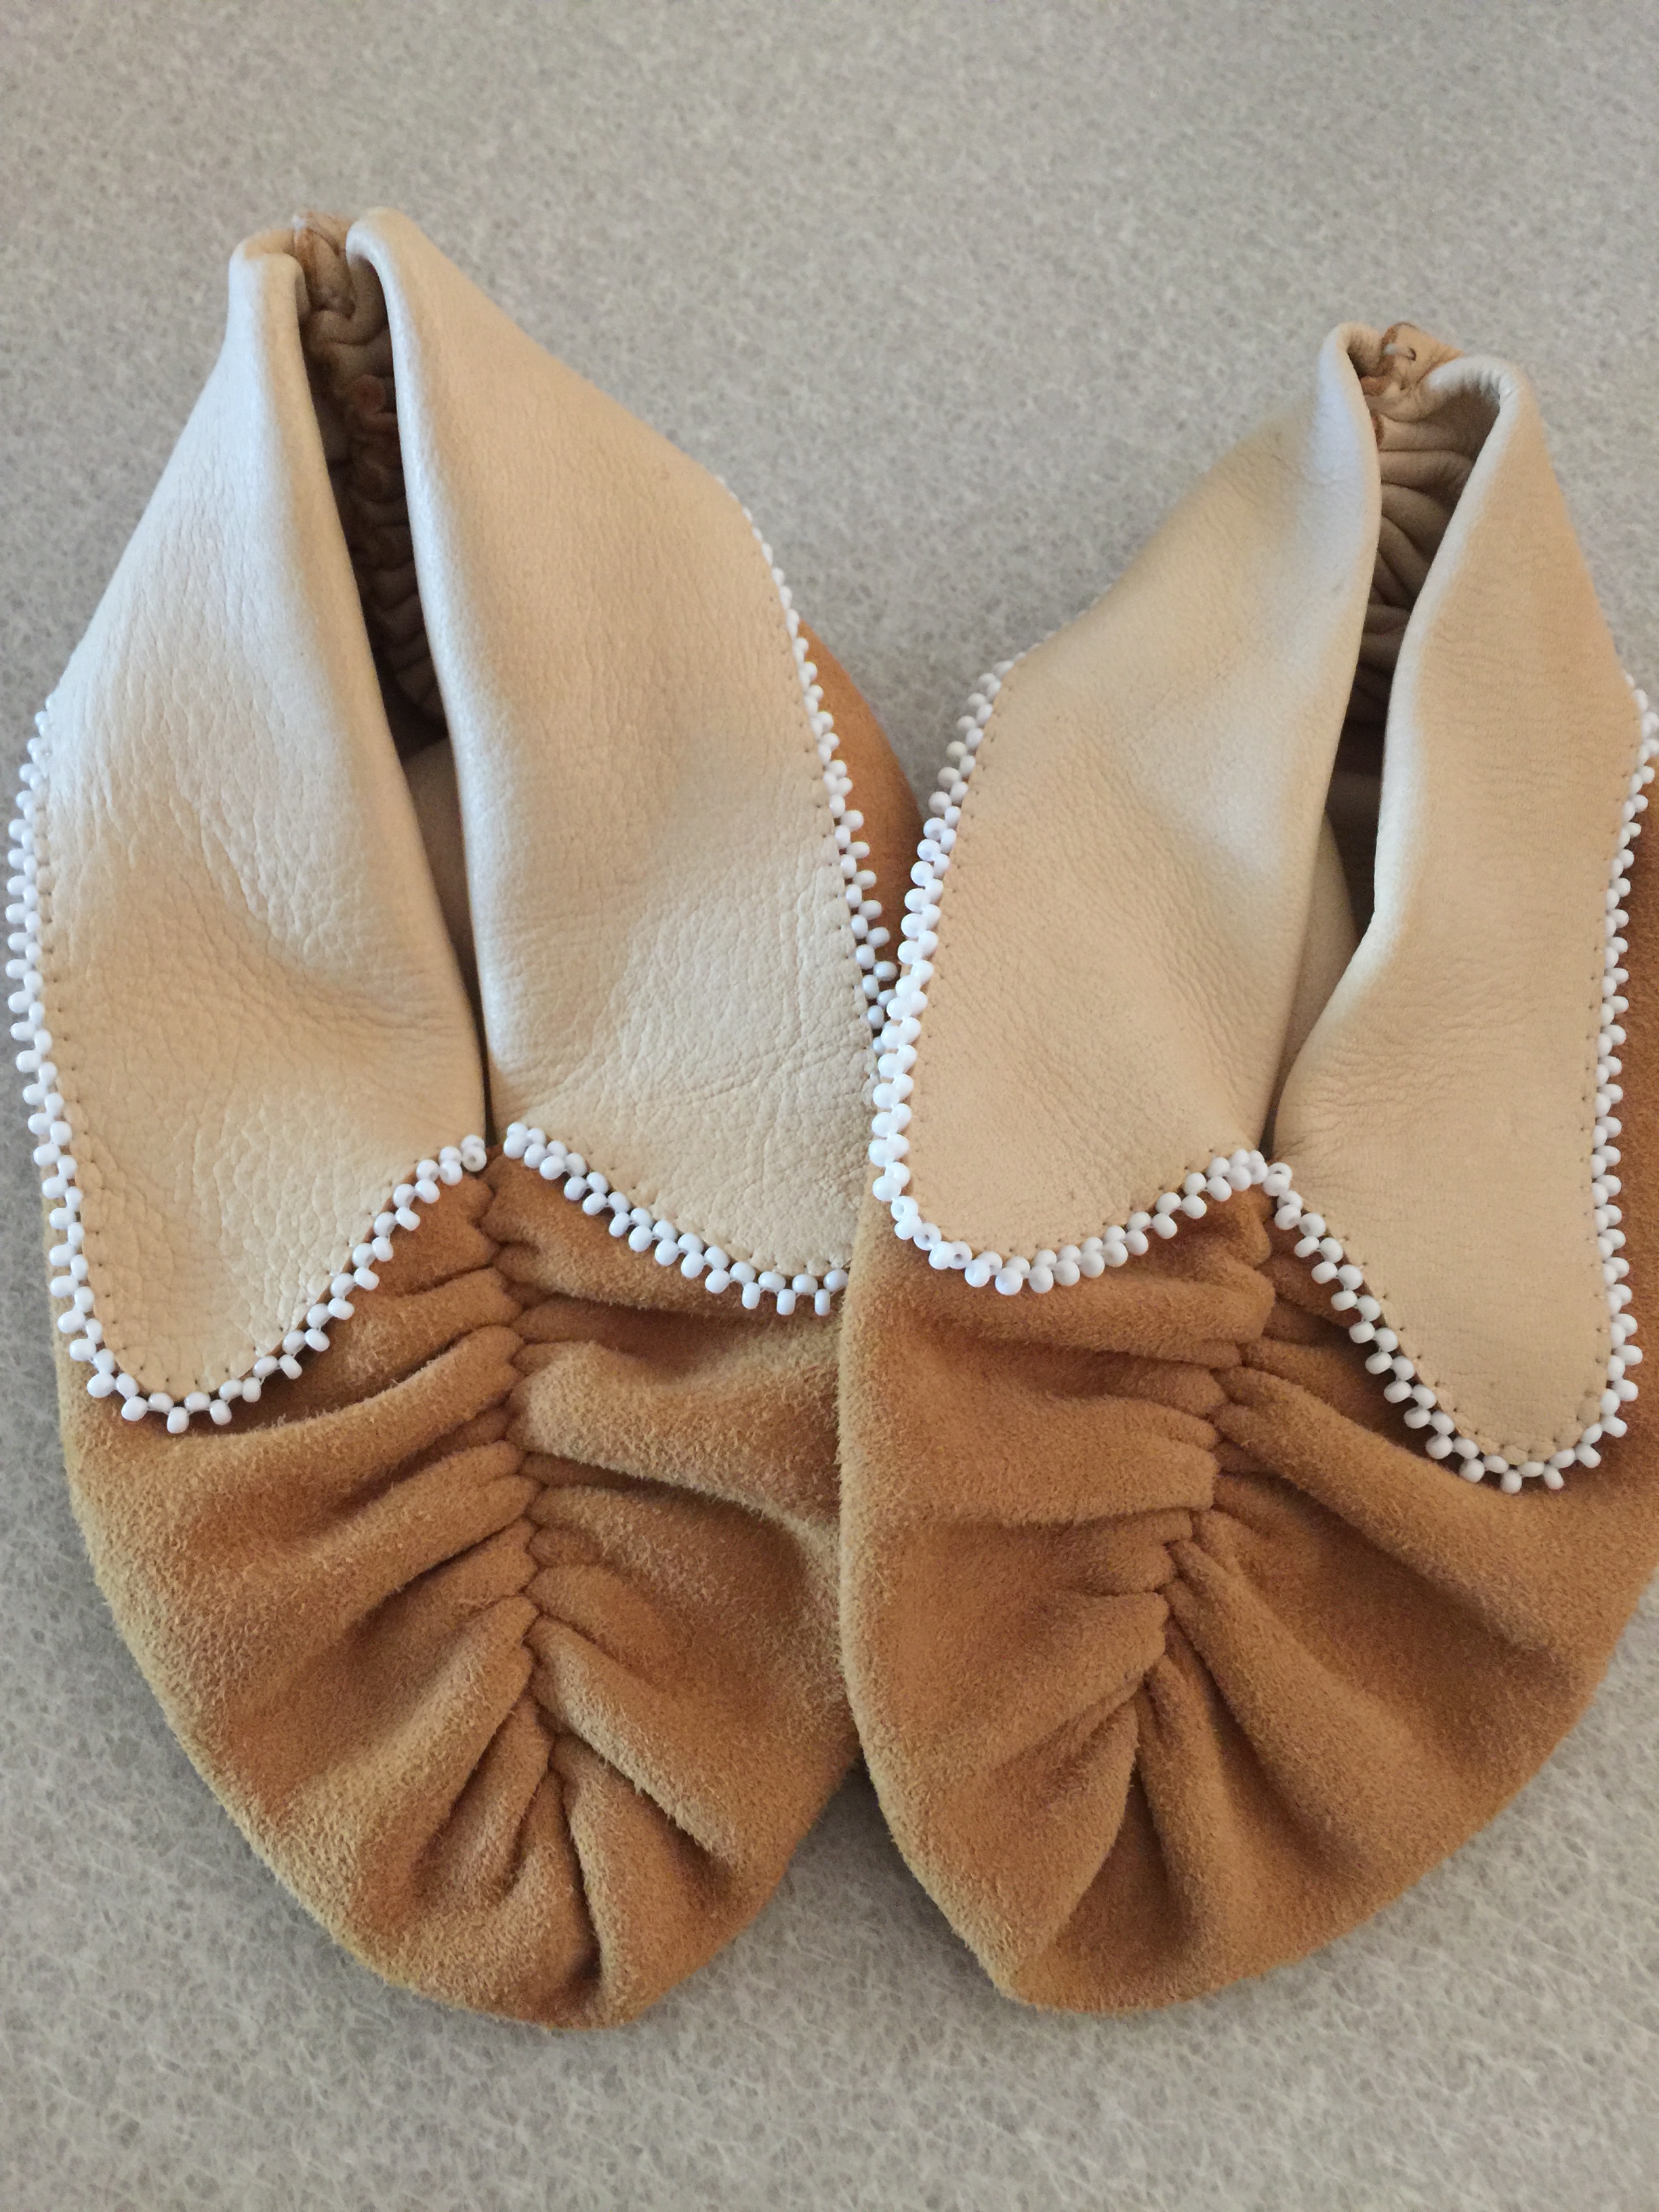 traditional cherokee moccasins